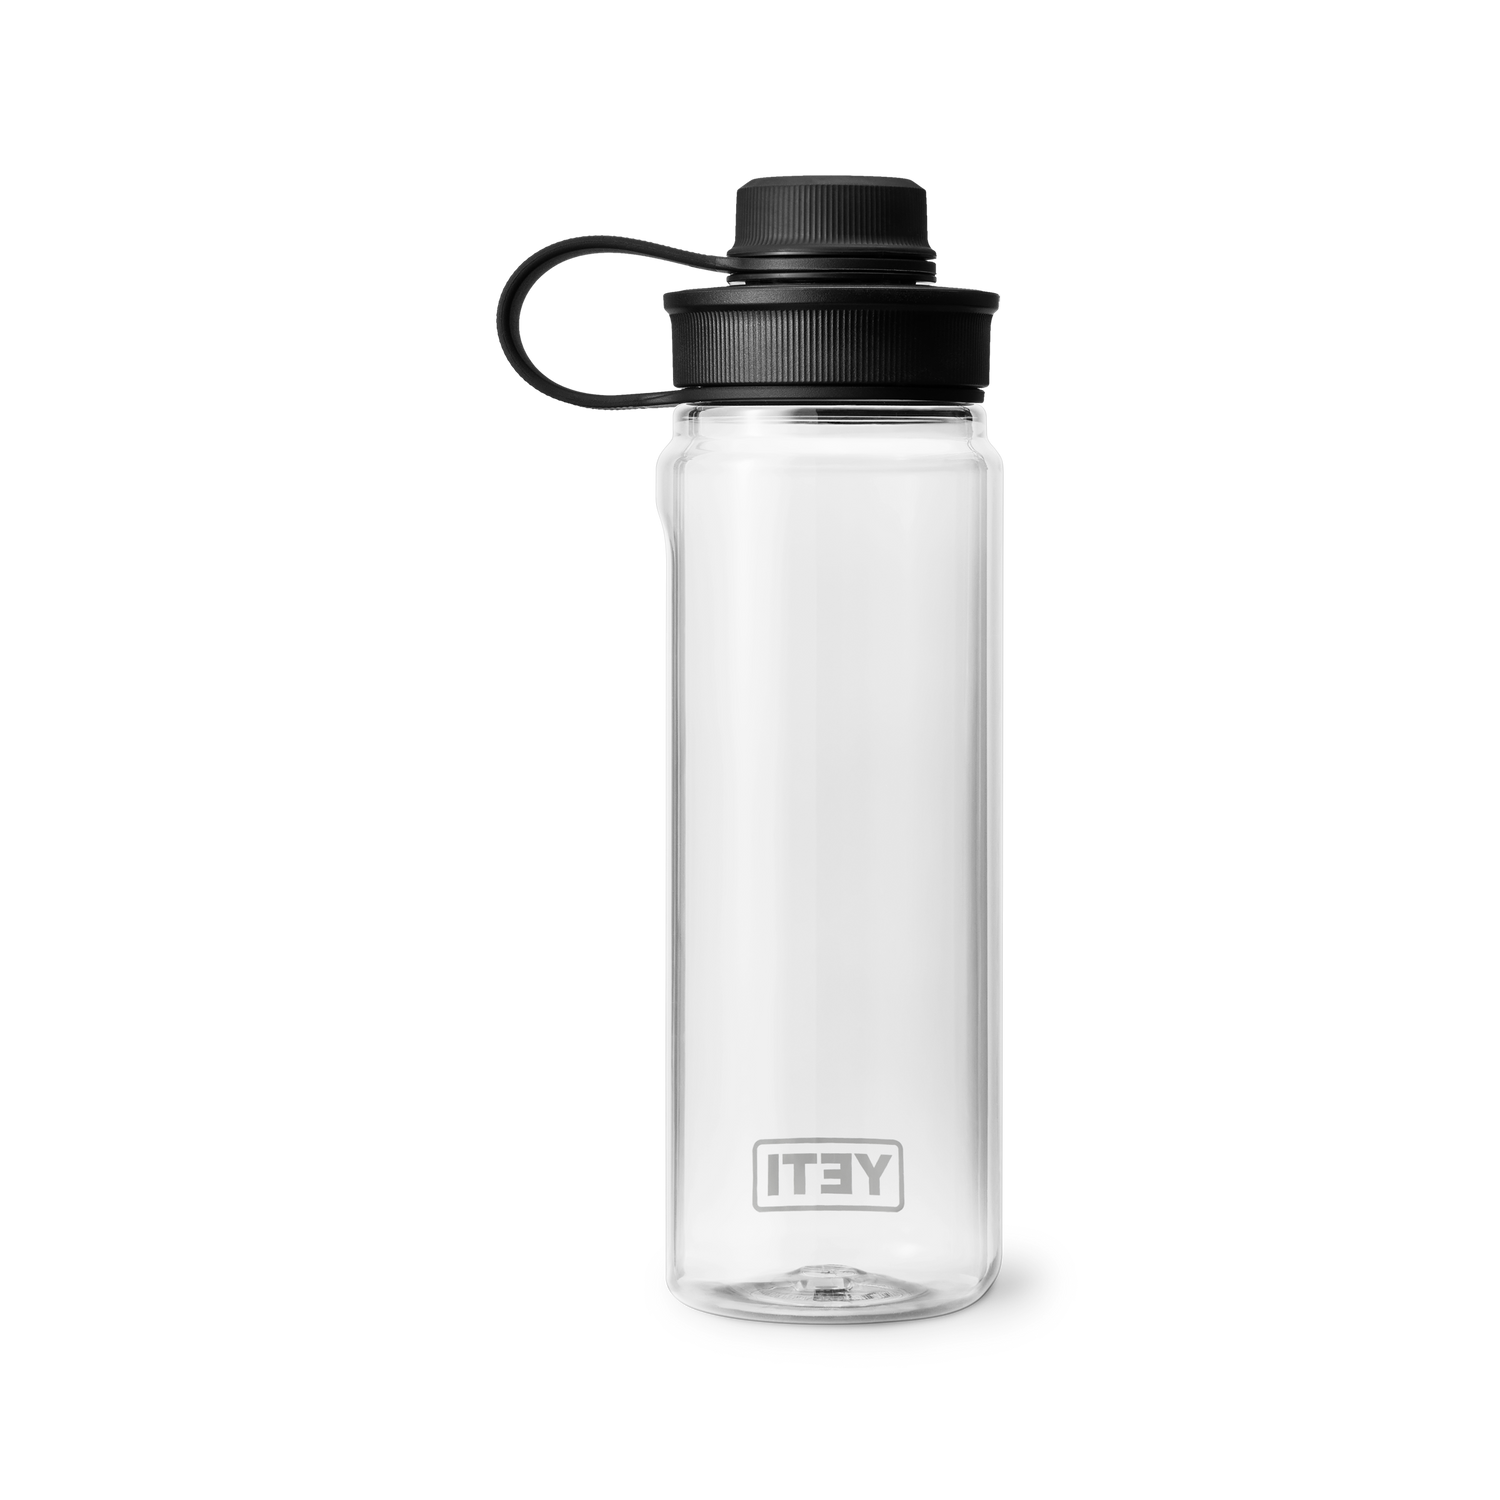 YETI_Wholesale_Drinkware_Yonder_Tether_Accs_750mL_Clear_Back_0773_B_2400x2400.png